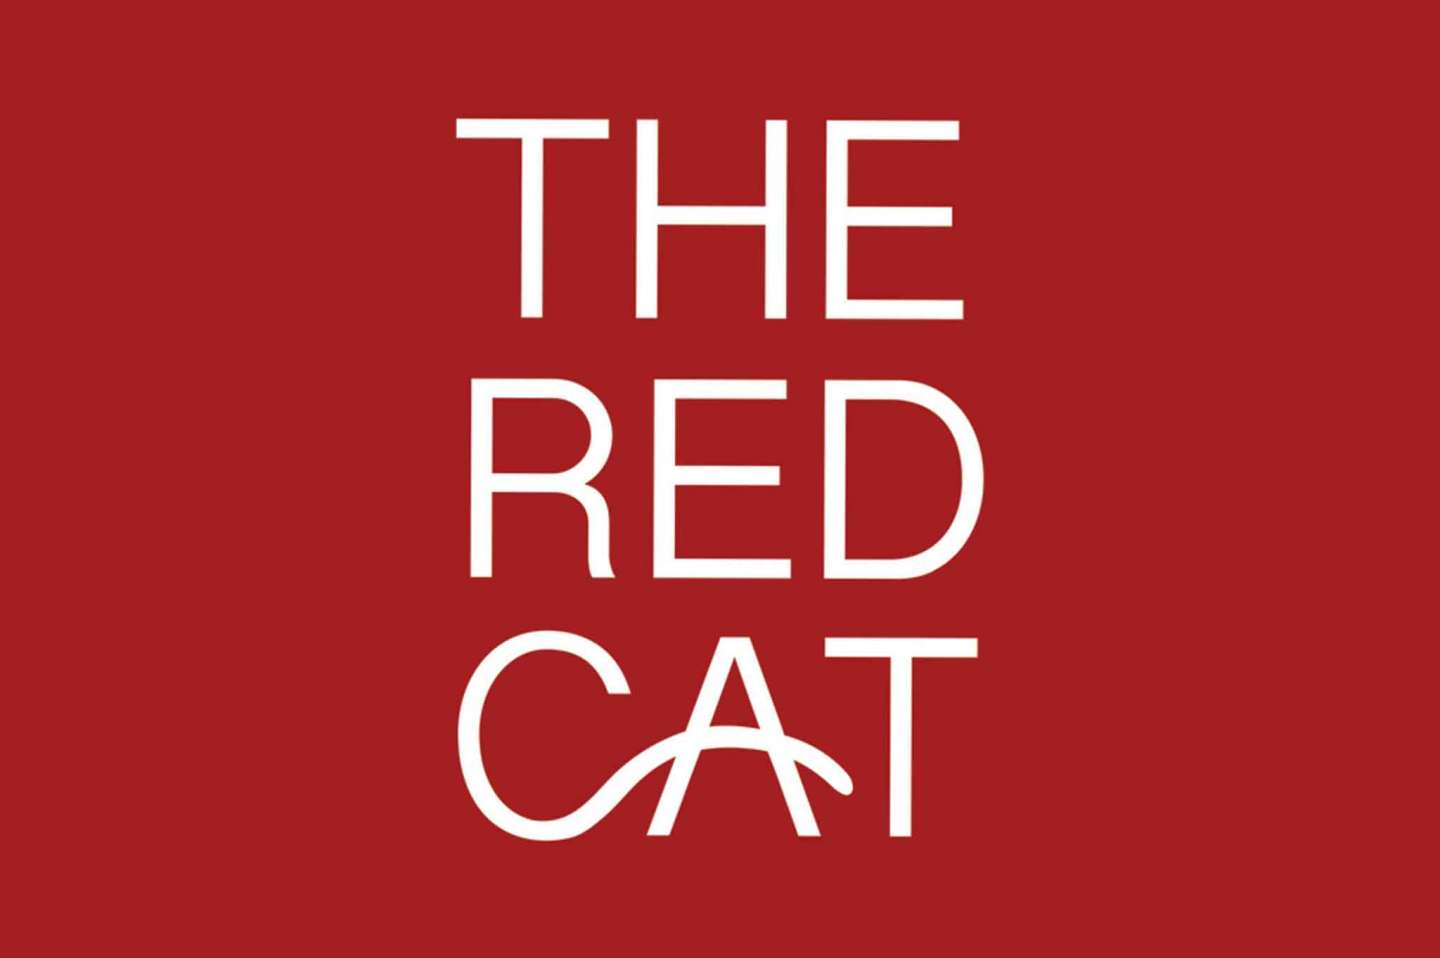 THE RED CAT